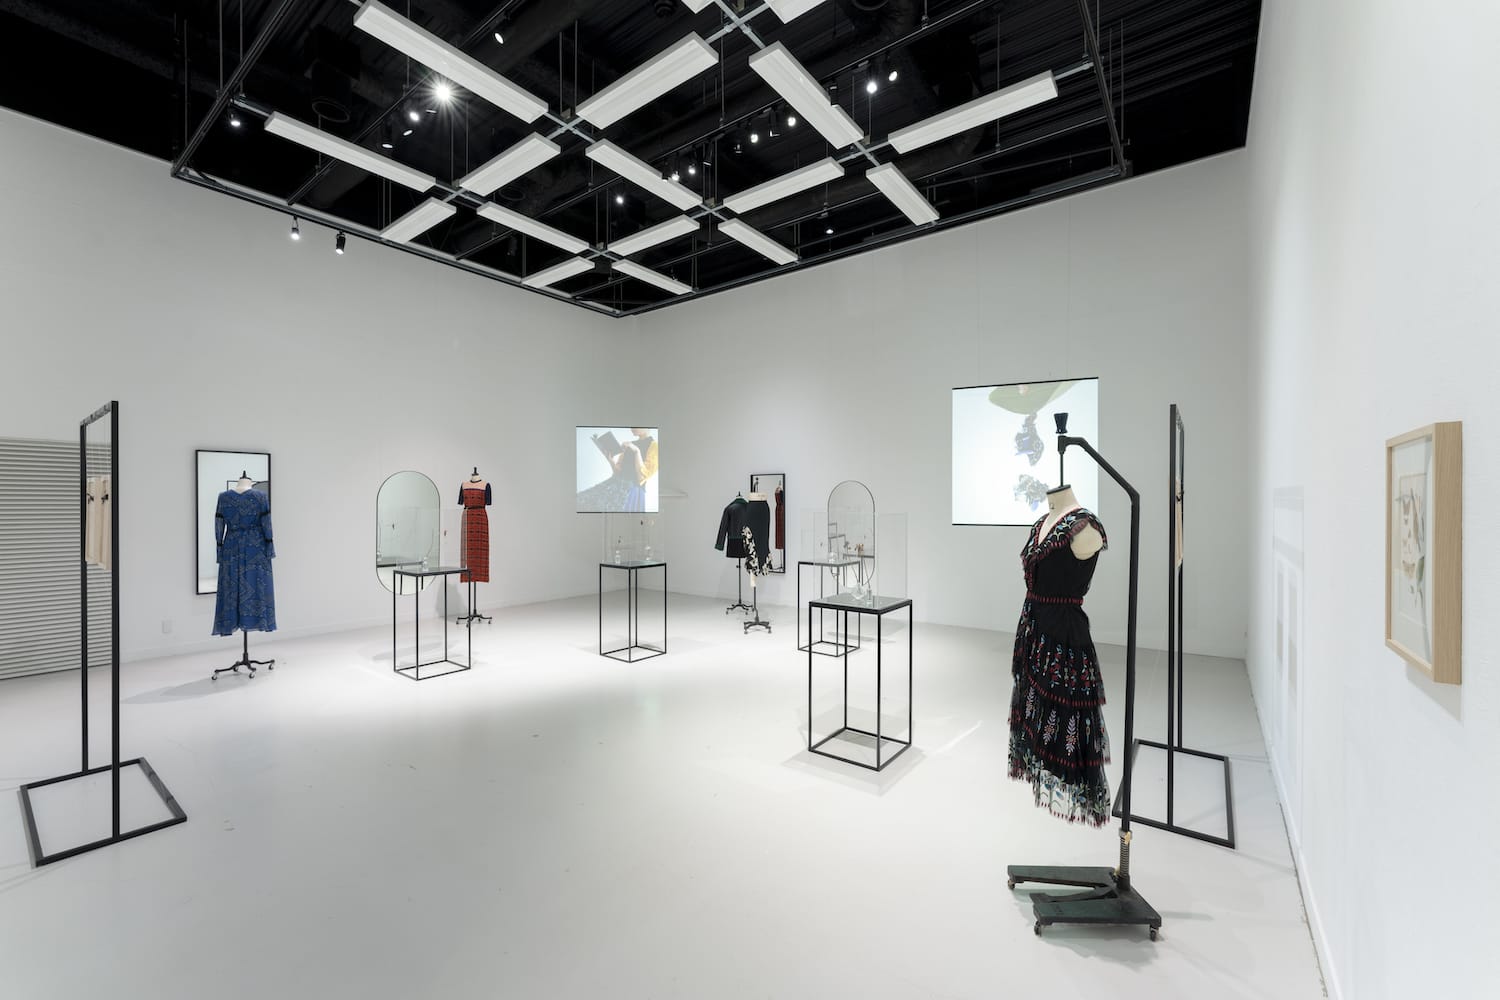 Installation view of “Seian University of Art and Design”